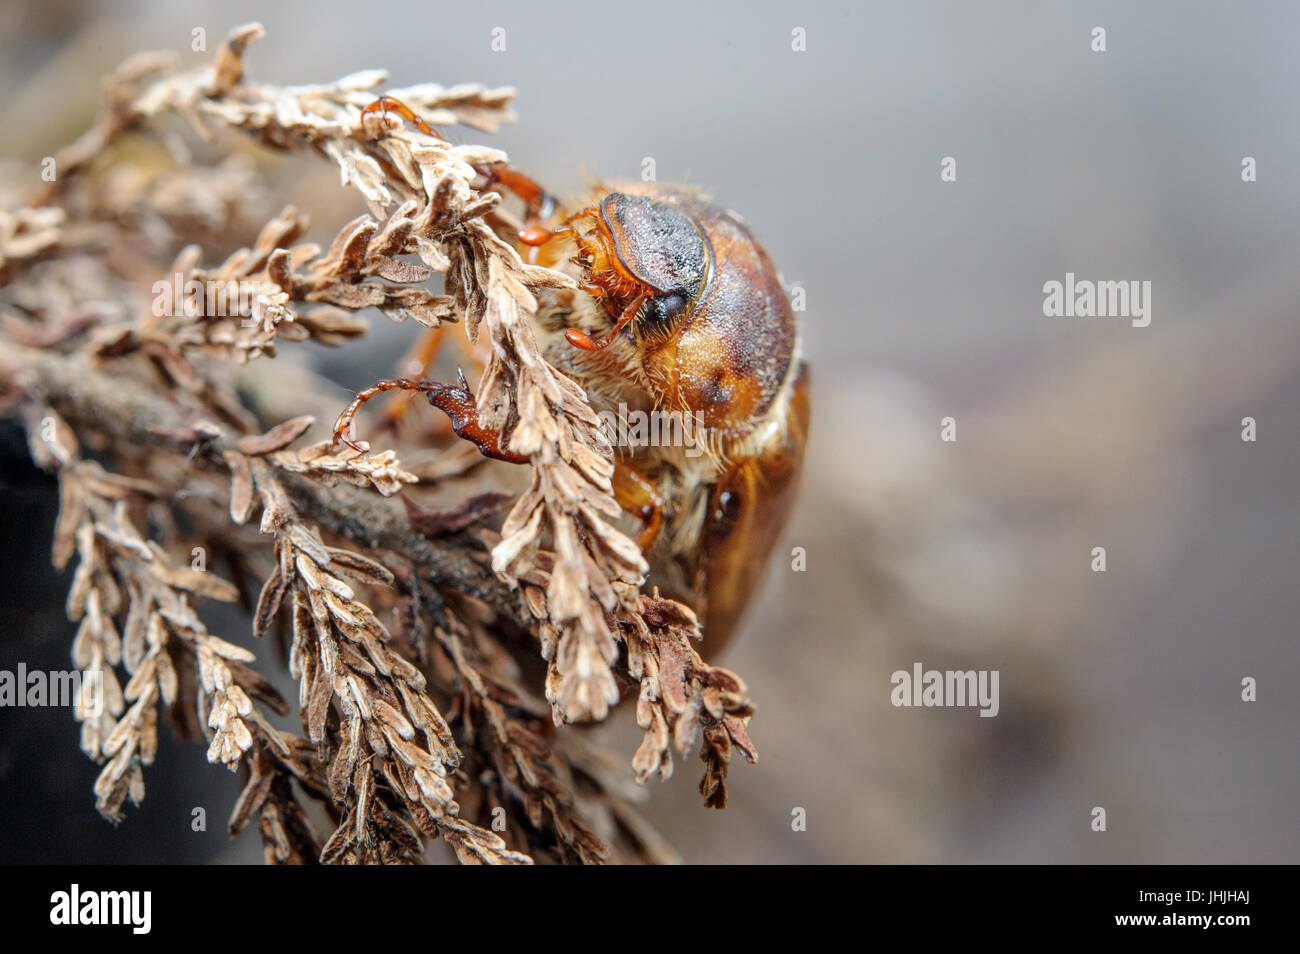 Common cockchafer on dried plant. European beetle. Invertebrate pest in backlight from closeup front view Stock Photo